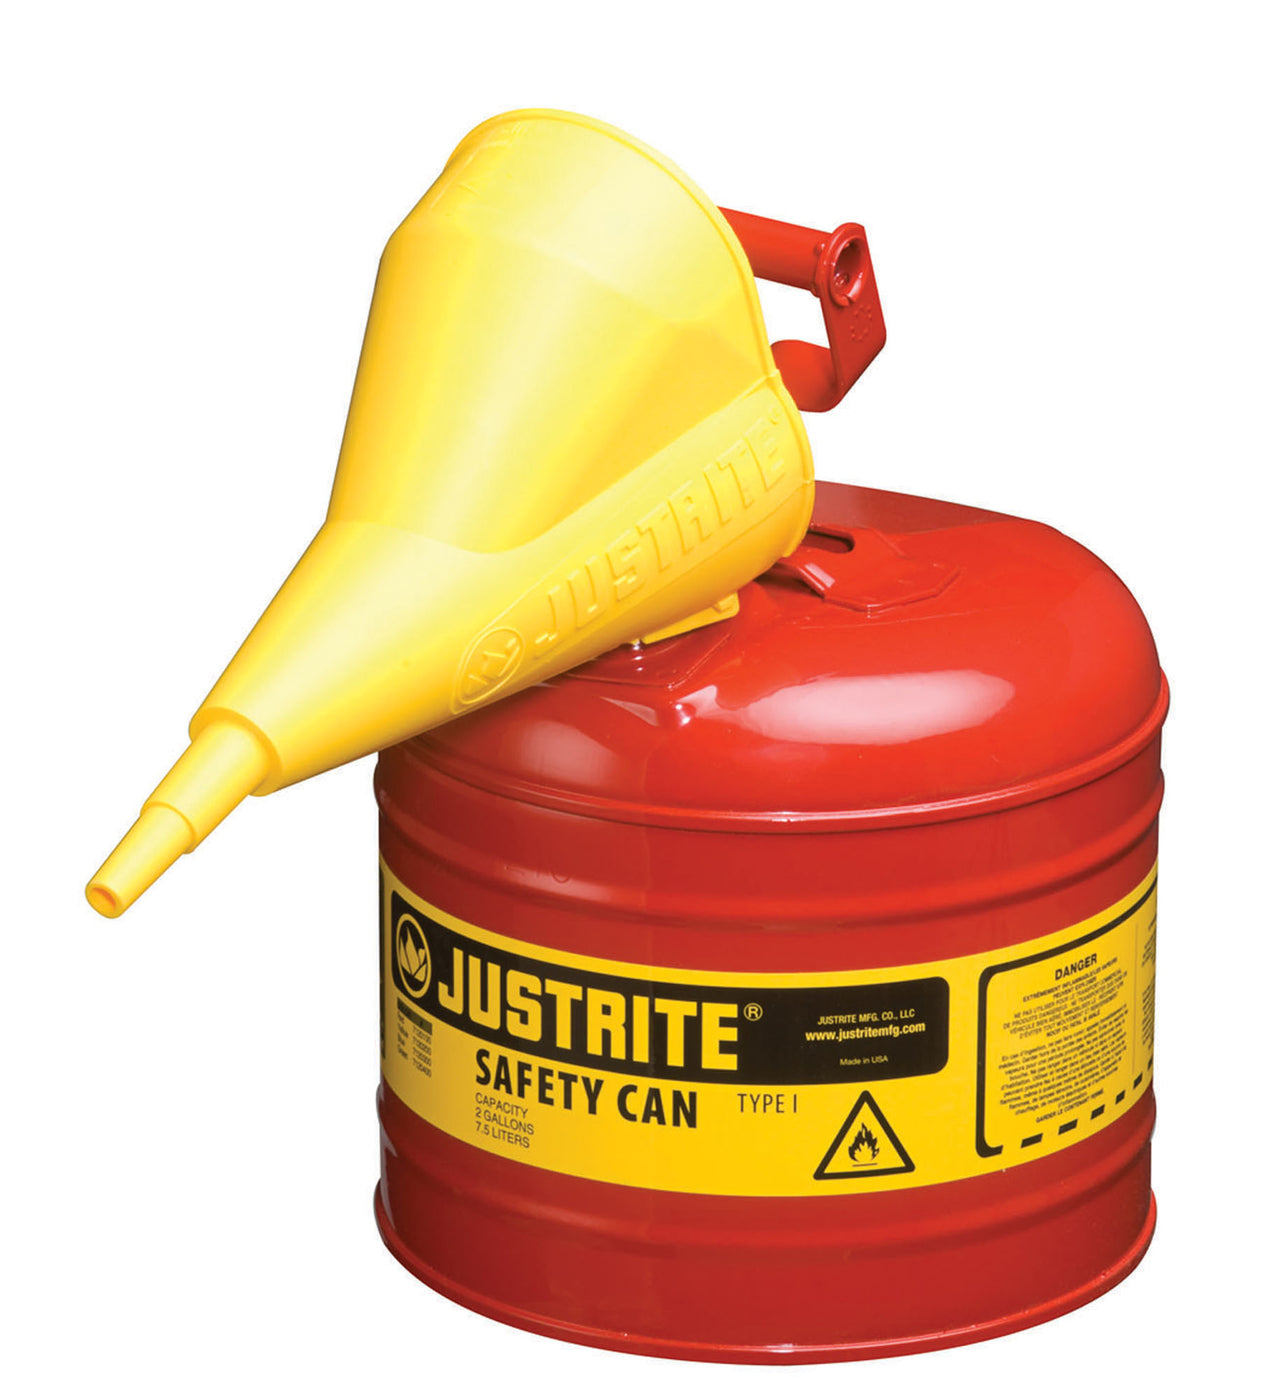 Justrite 2-Gallon Steel Type I Safety Can w/ Funnel